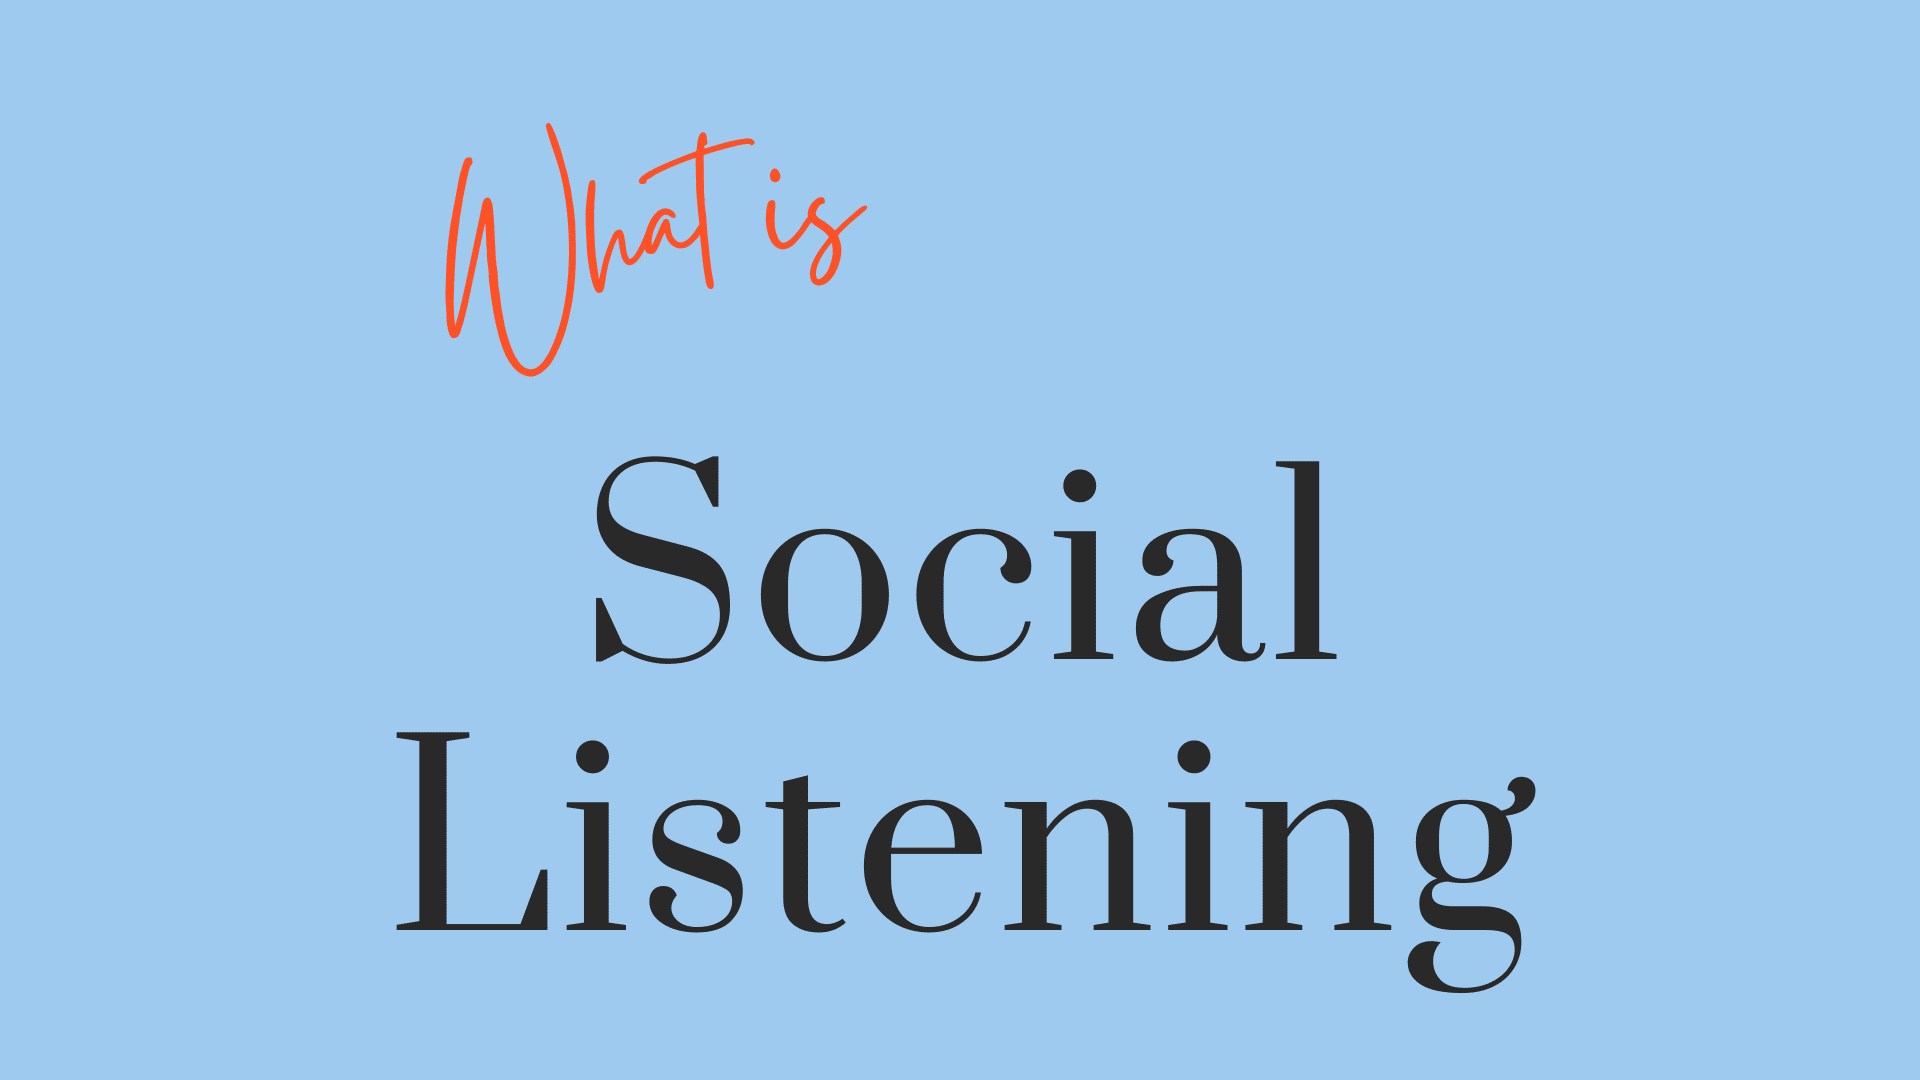 What is social listening?